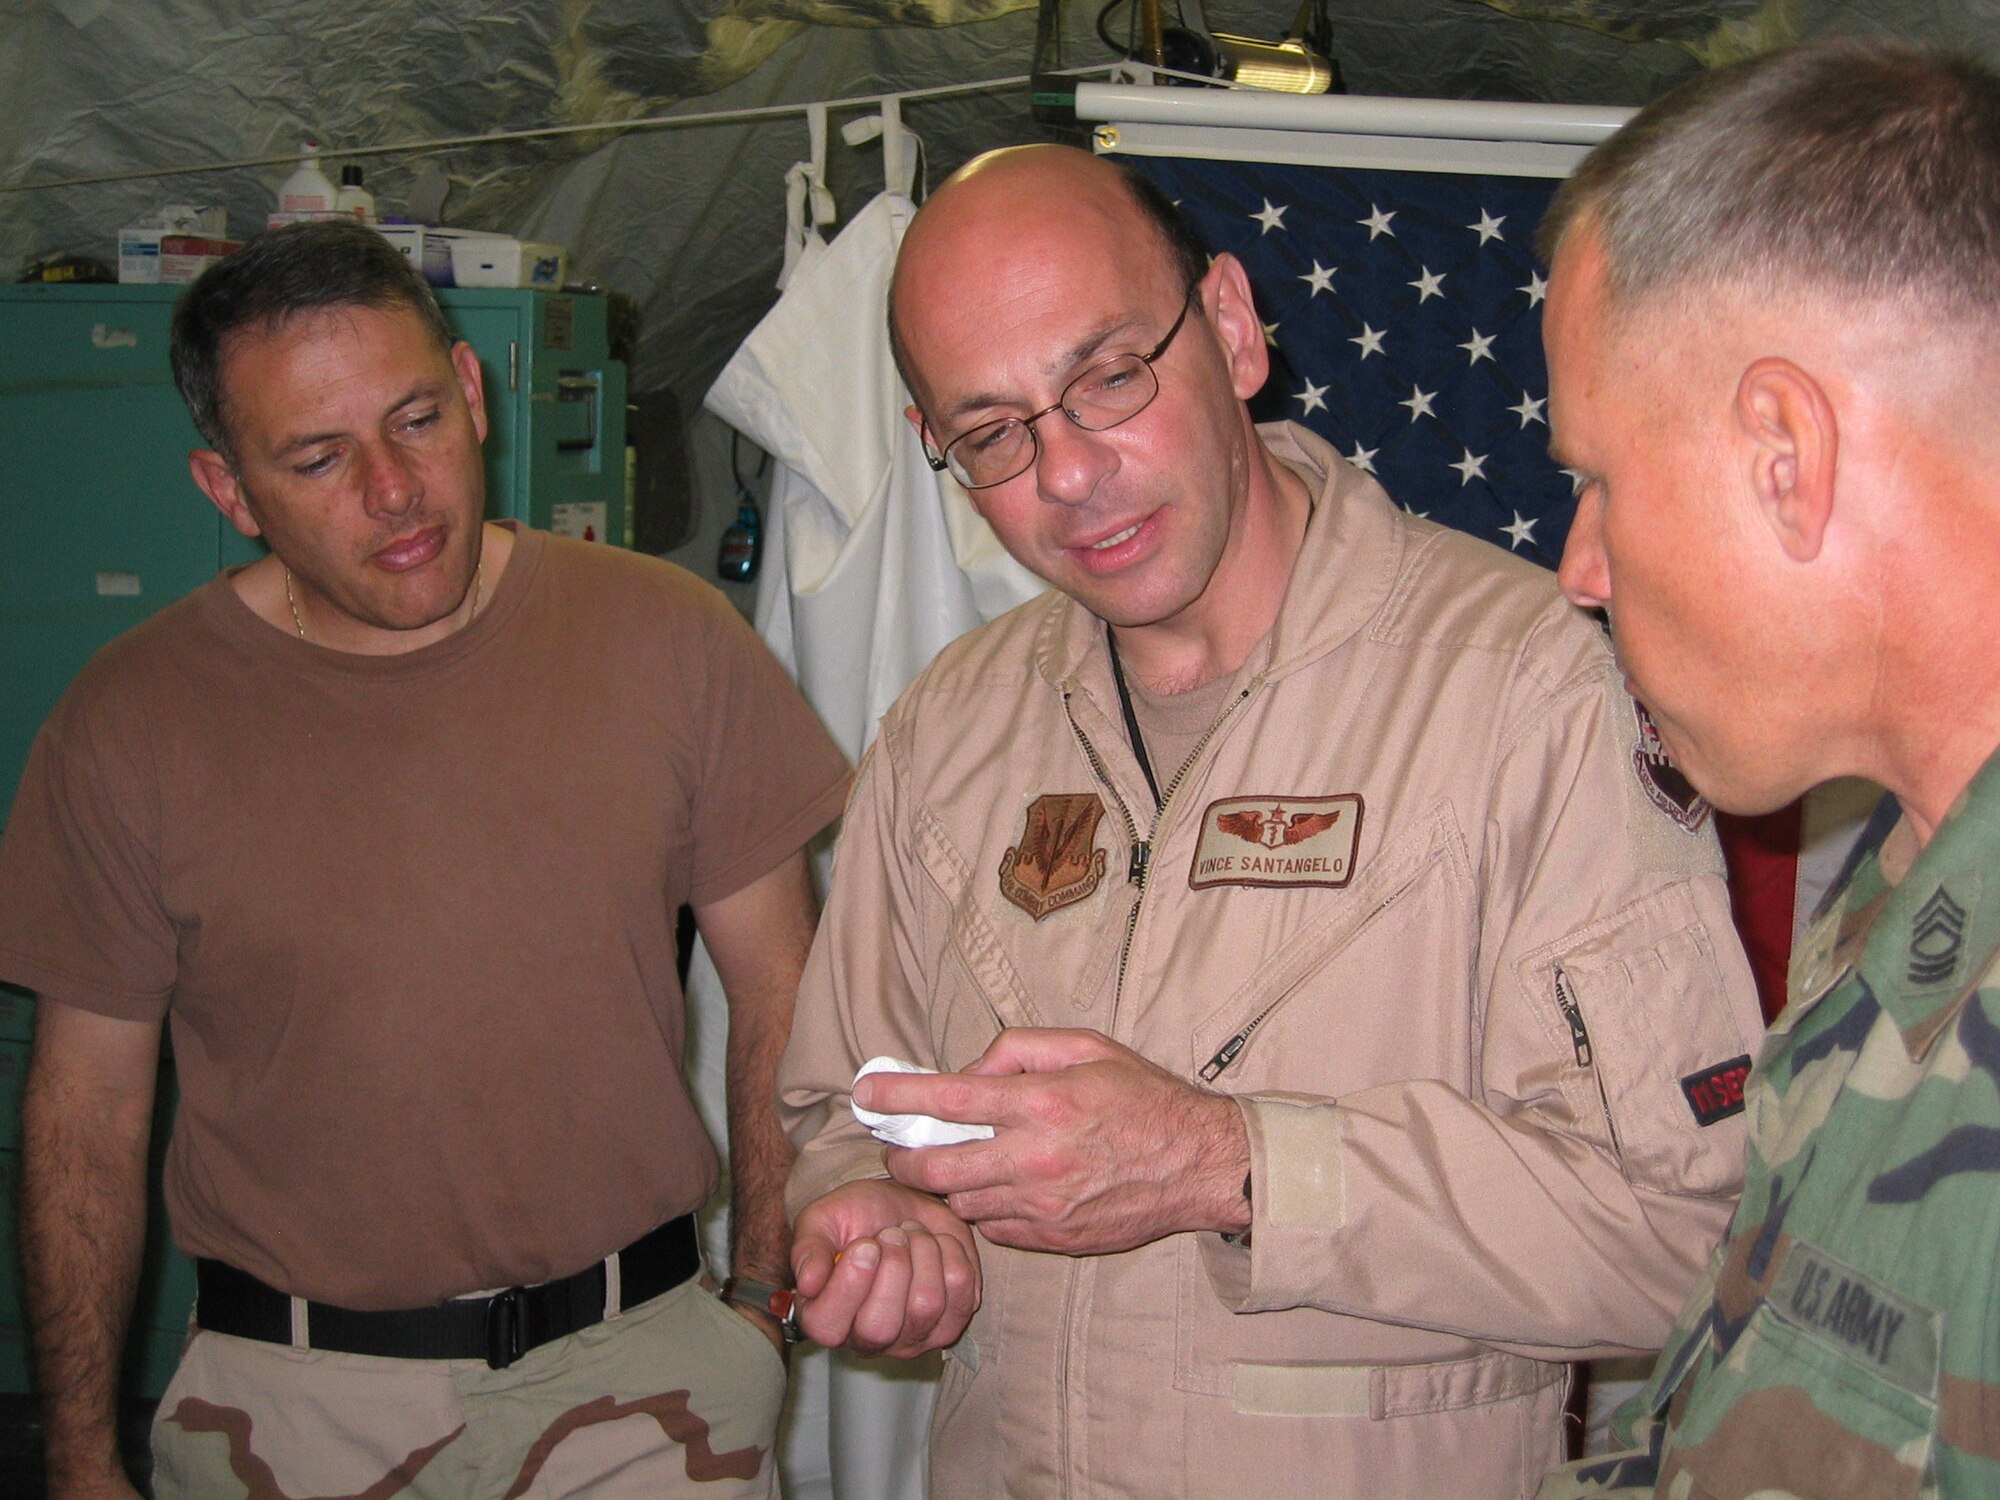 ISLAMABAD, PAKISTAN (AMCNS) – Master Sgt. Luis Valladares (left), independent duty medical technician, and Lt. Col. (Dr.) Vince Santangelo (center), air transportable clinic commander, discuss medication options with a soldier assigned to the humanitarian relief operation in Pakistan. (Photo by 1st Lt. Erick Saks)